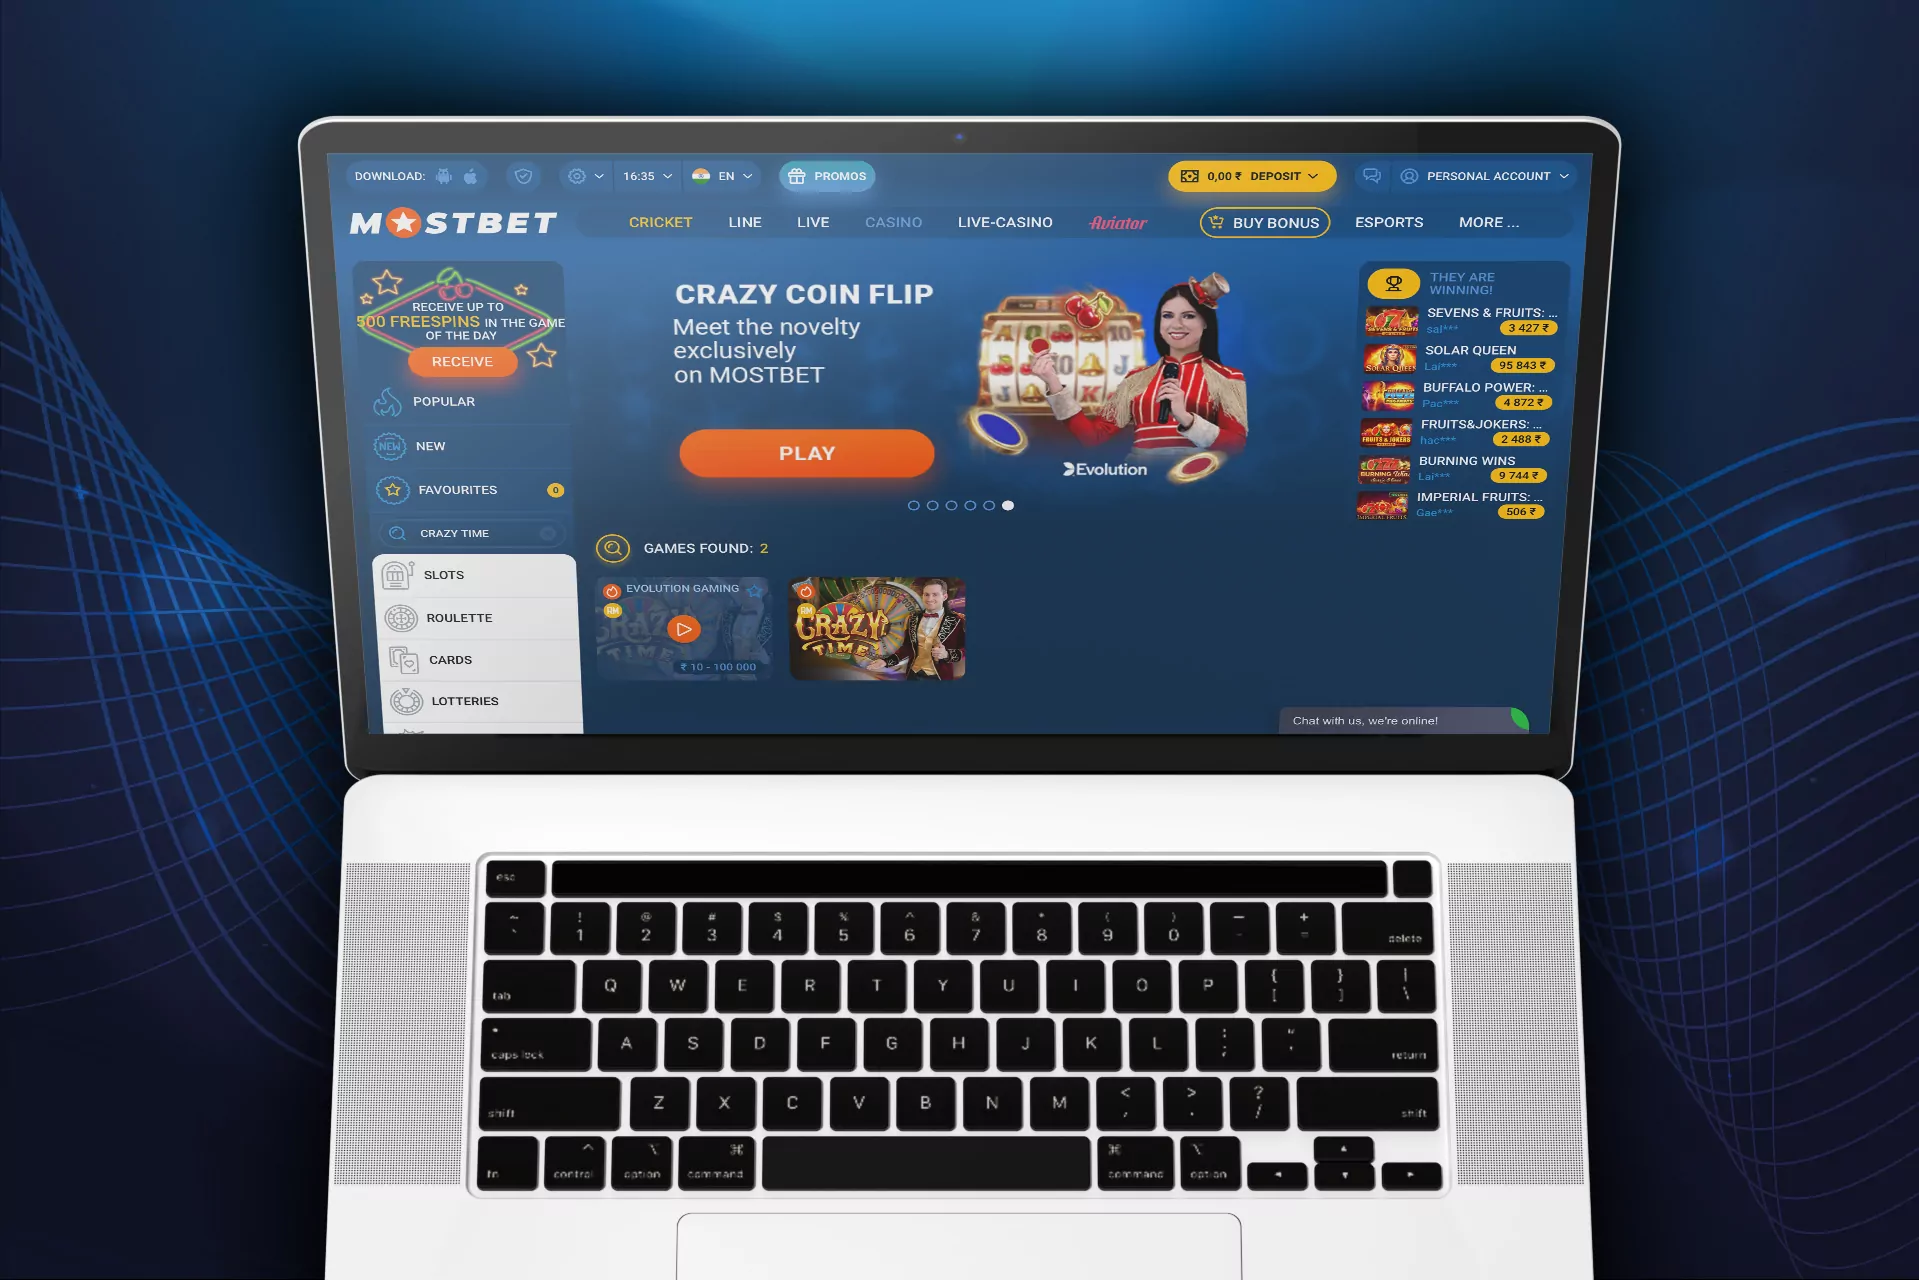 Crazy time: crazy coin flip, meet the exclusive new product at Mostbet.